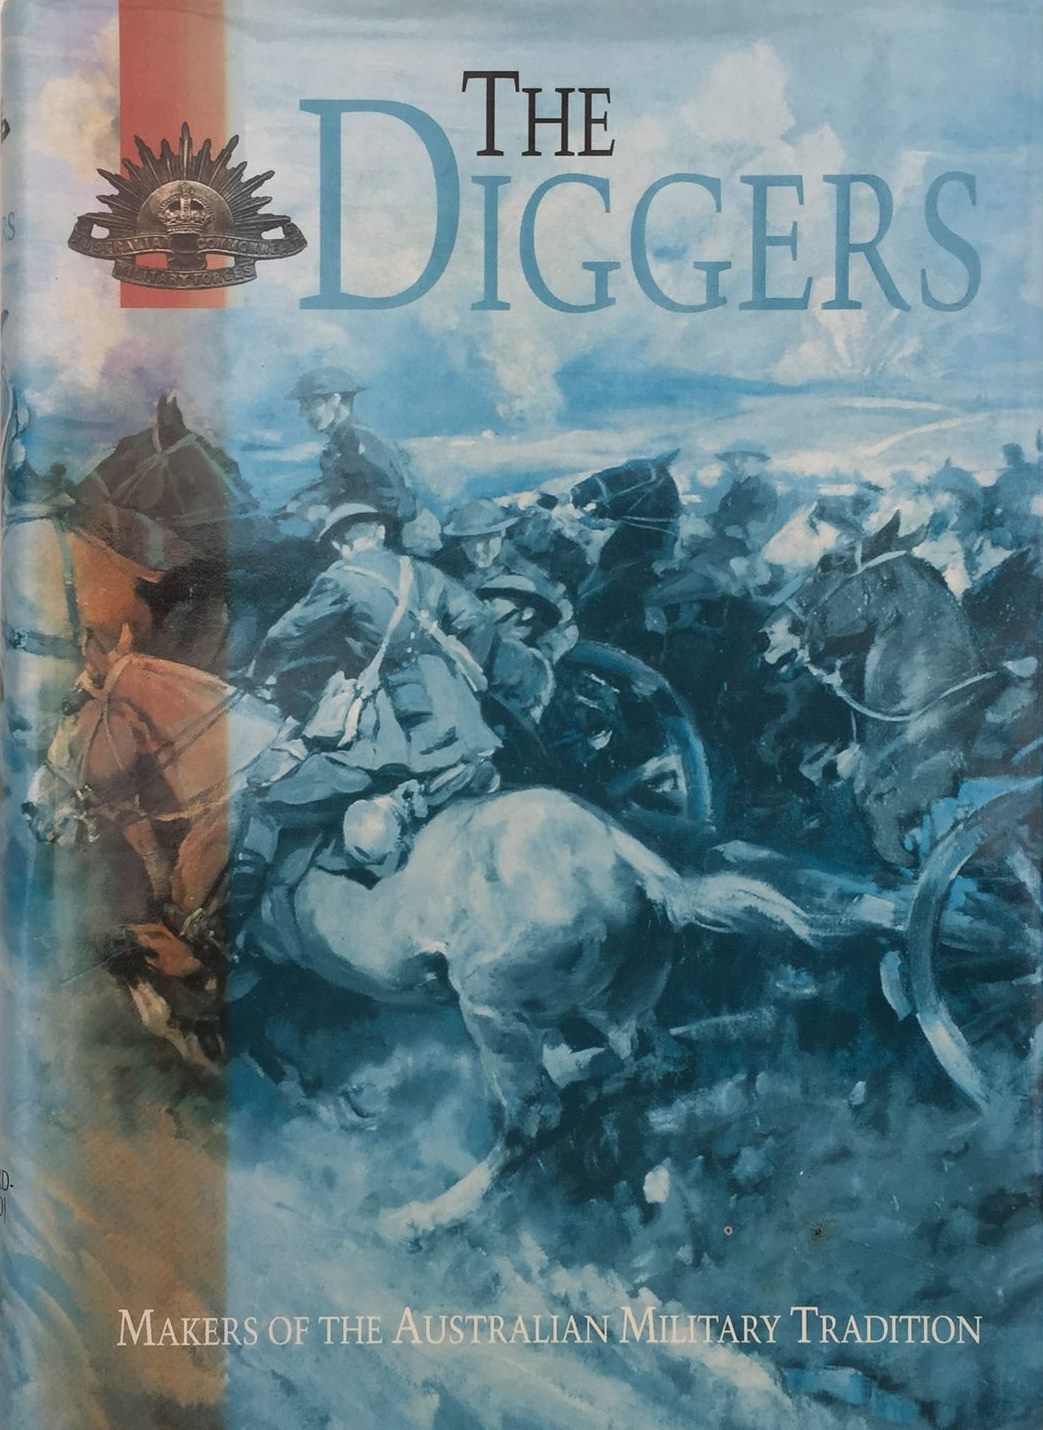 THE DIGGERS: Makers of The Australian Military Tradition